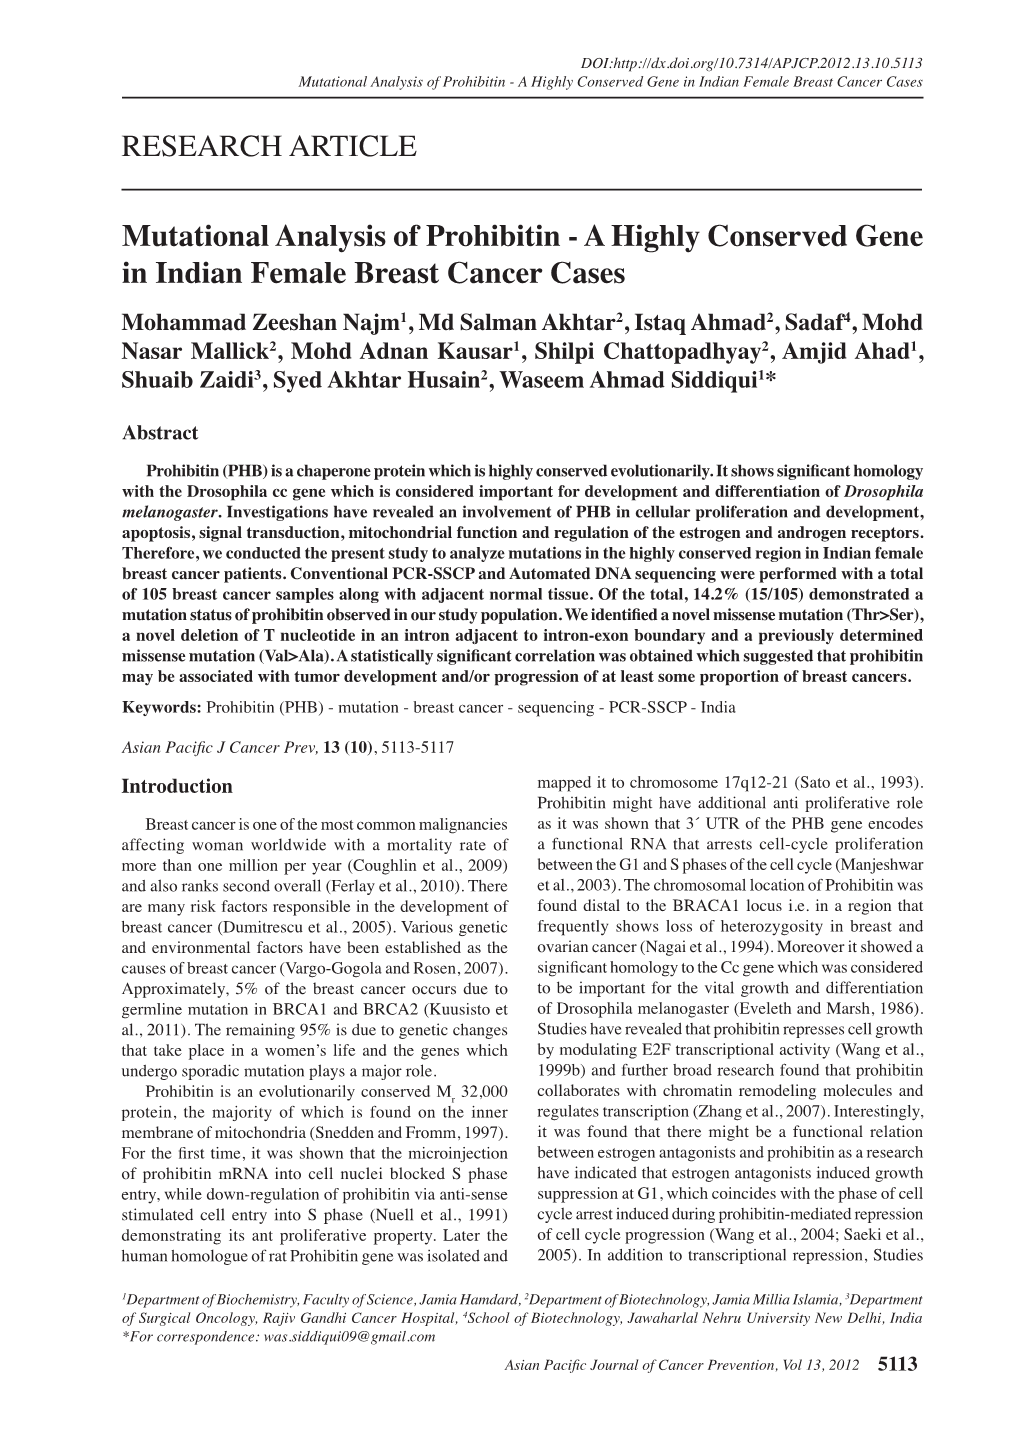 Mutational Analysis of Prohibitin-A Highly Conserved Gene in Indian